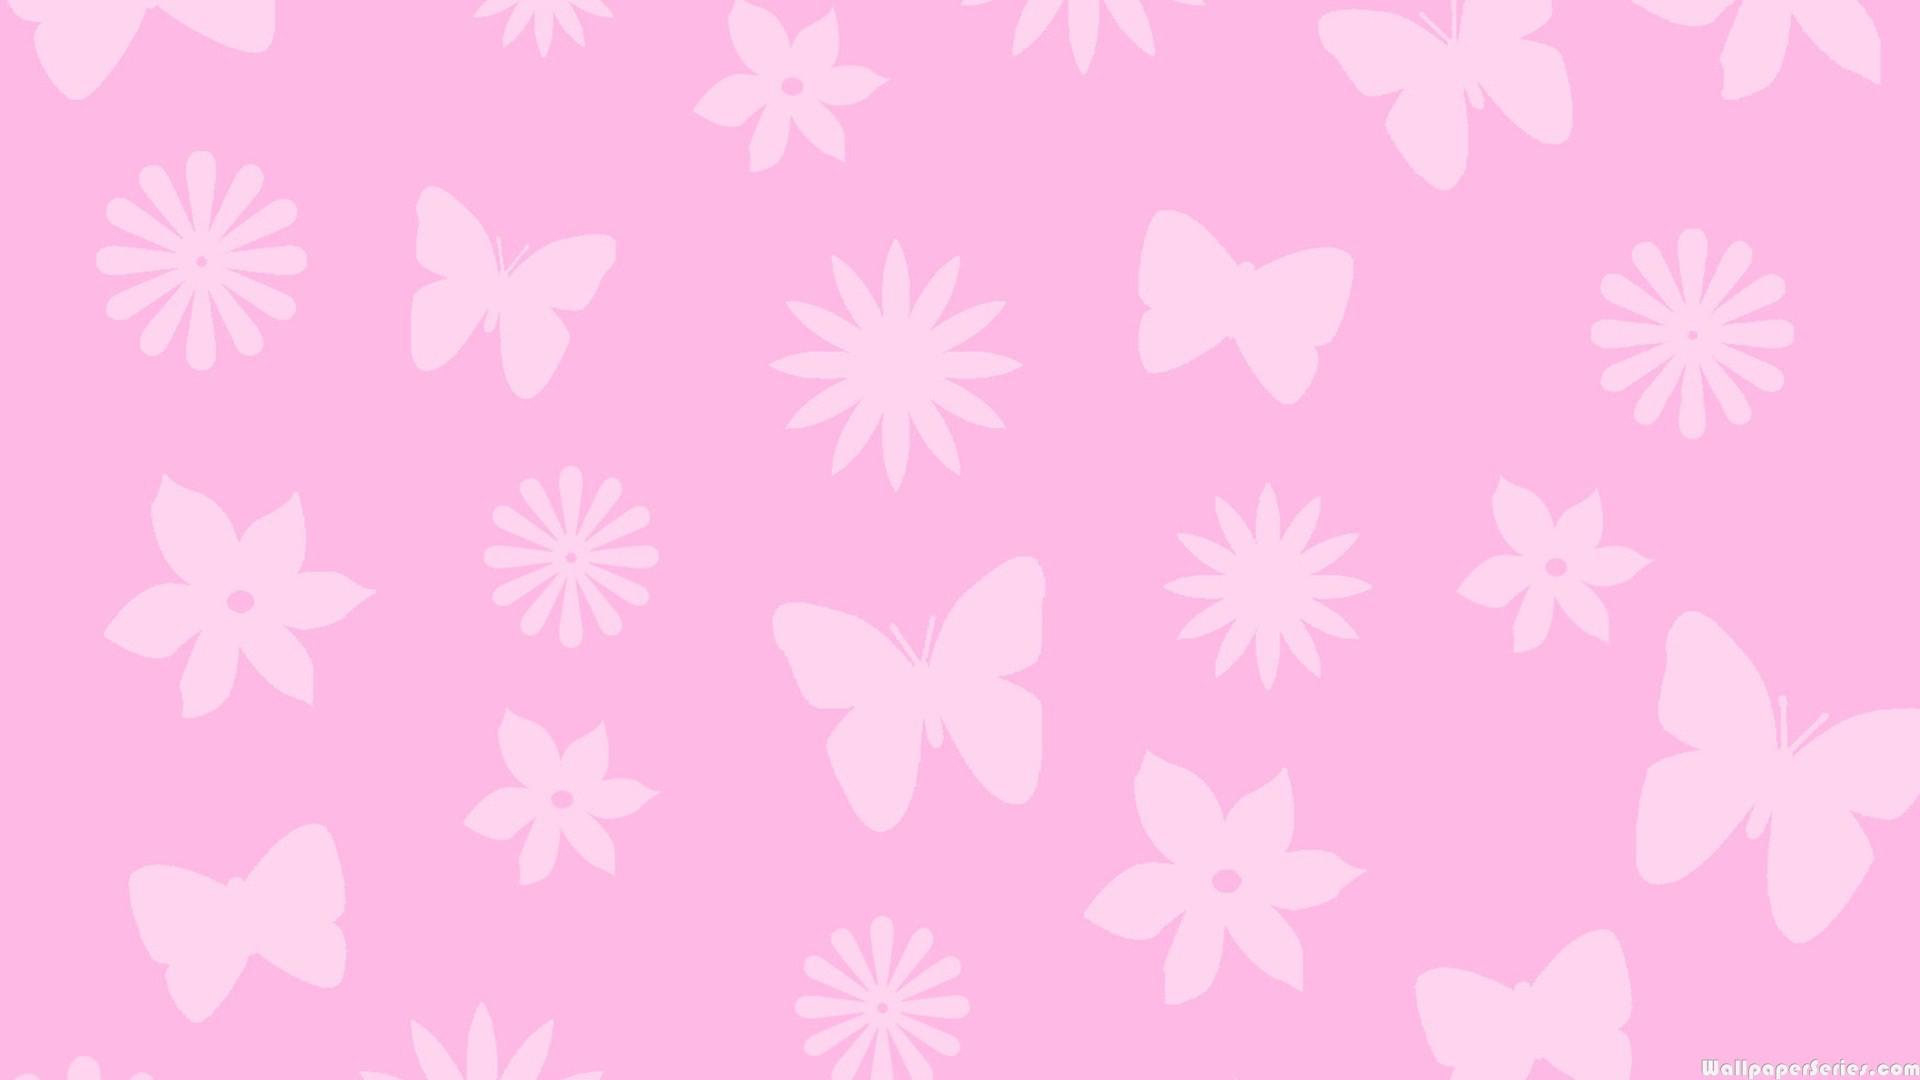 35 High Definition Pink Wallpapers Backgrounds For Free Download